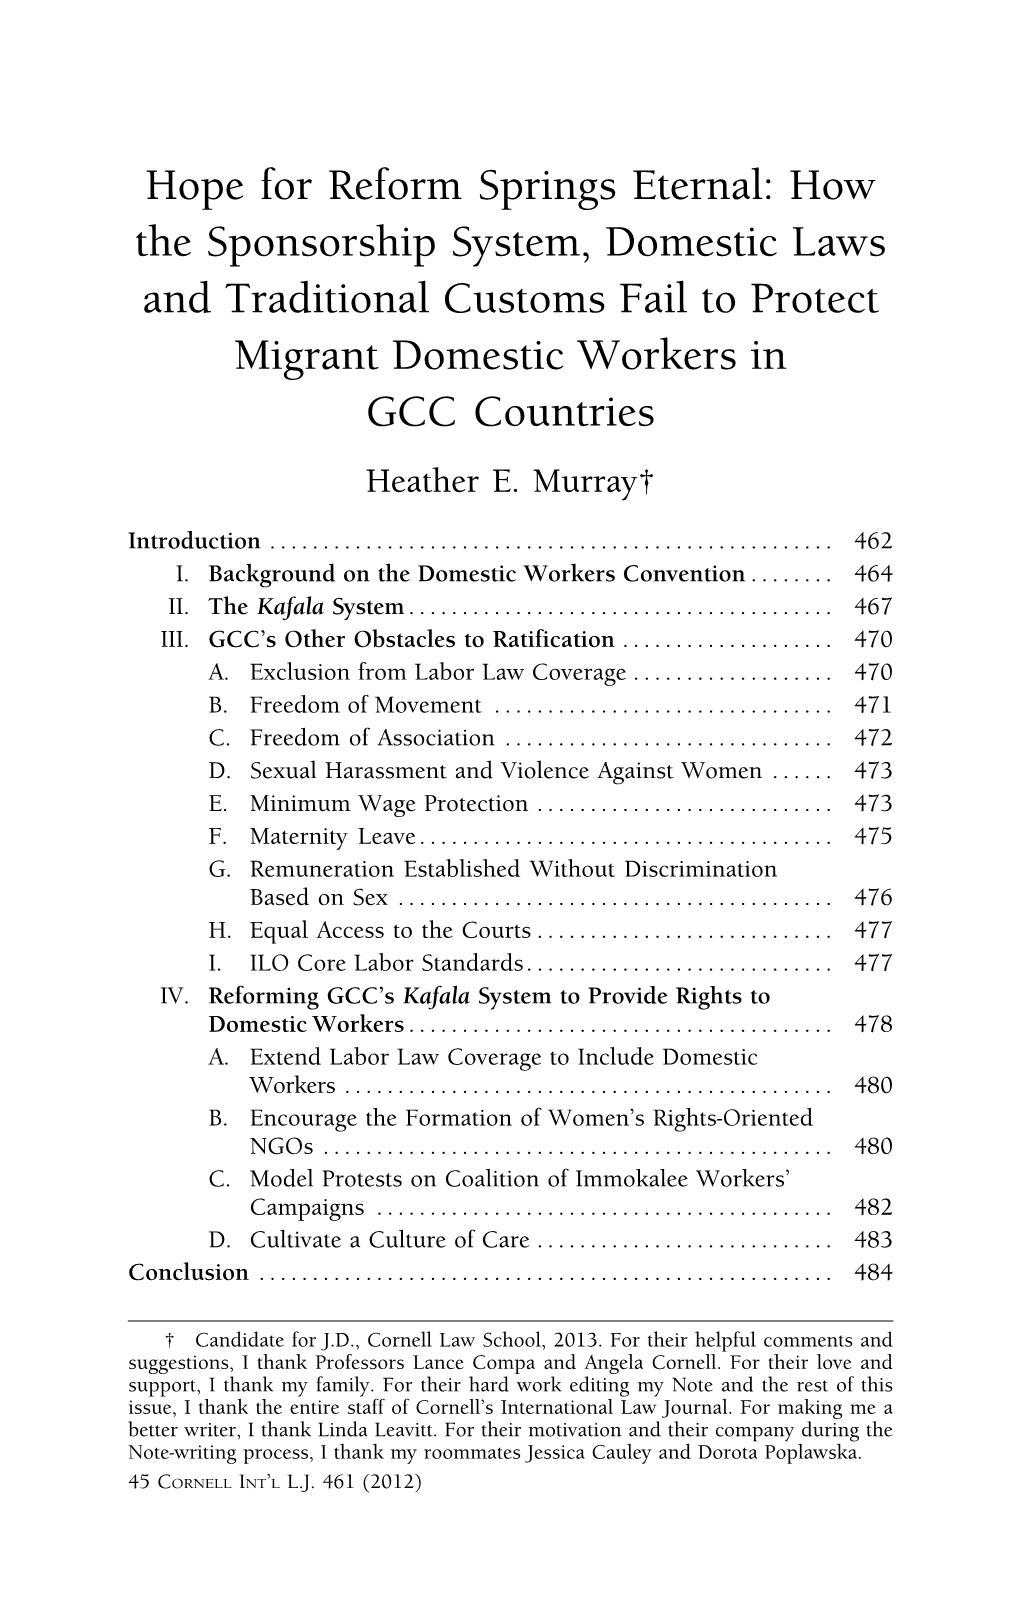 Hope for Reform Springs Eternal: How the Sponsorship System, Domestic Laws and Traditional Customs Fail to Protect Migrant Domestic Workers in GCC Countries Heather E